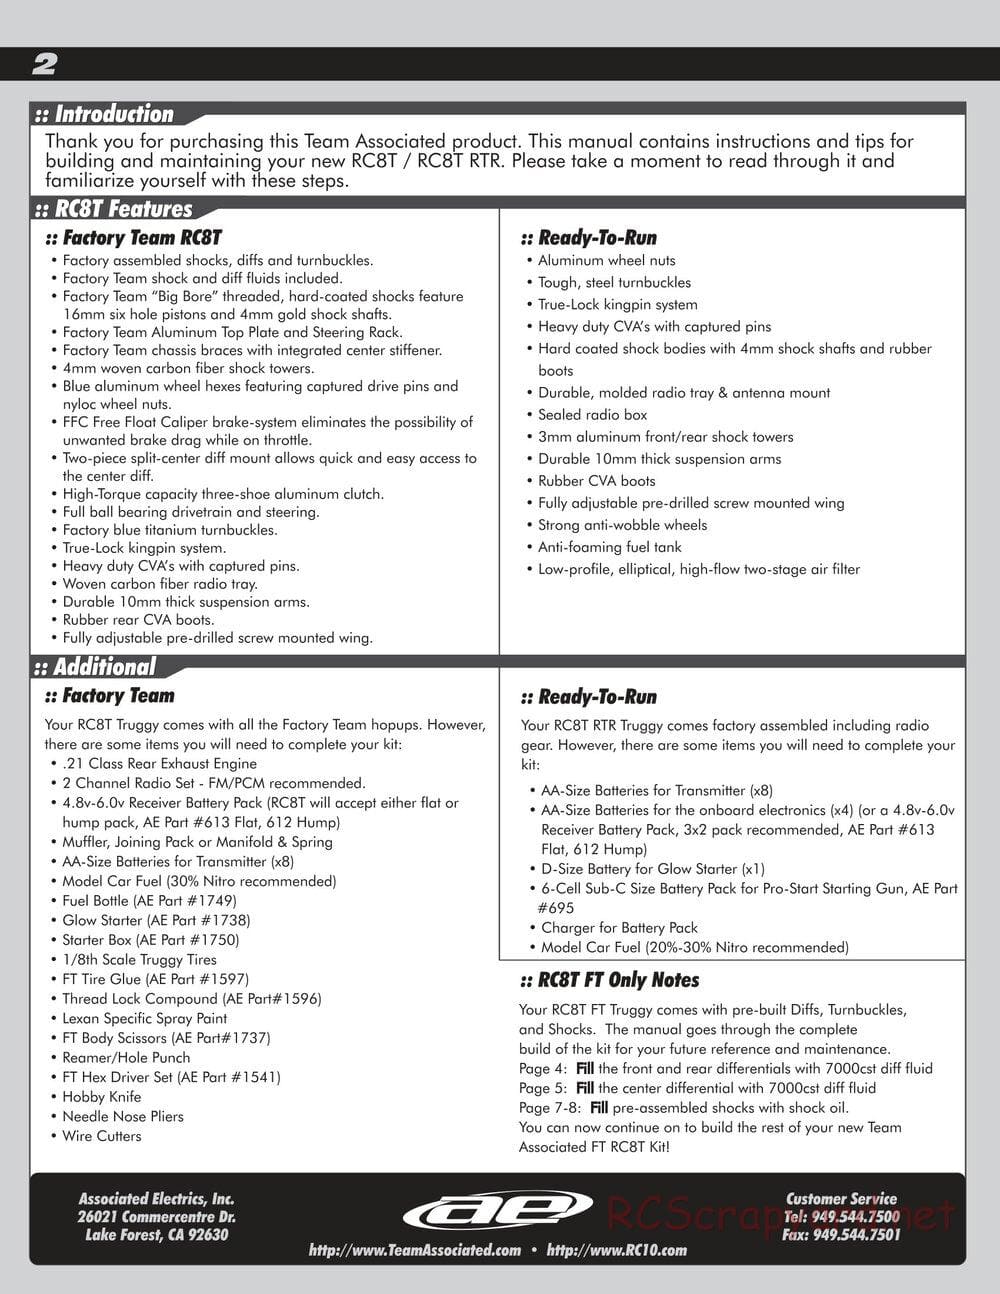 Team Associated - RC8T Factory Team - Manual - Page 2